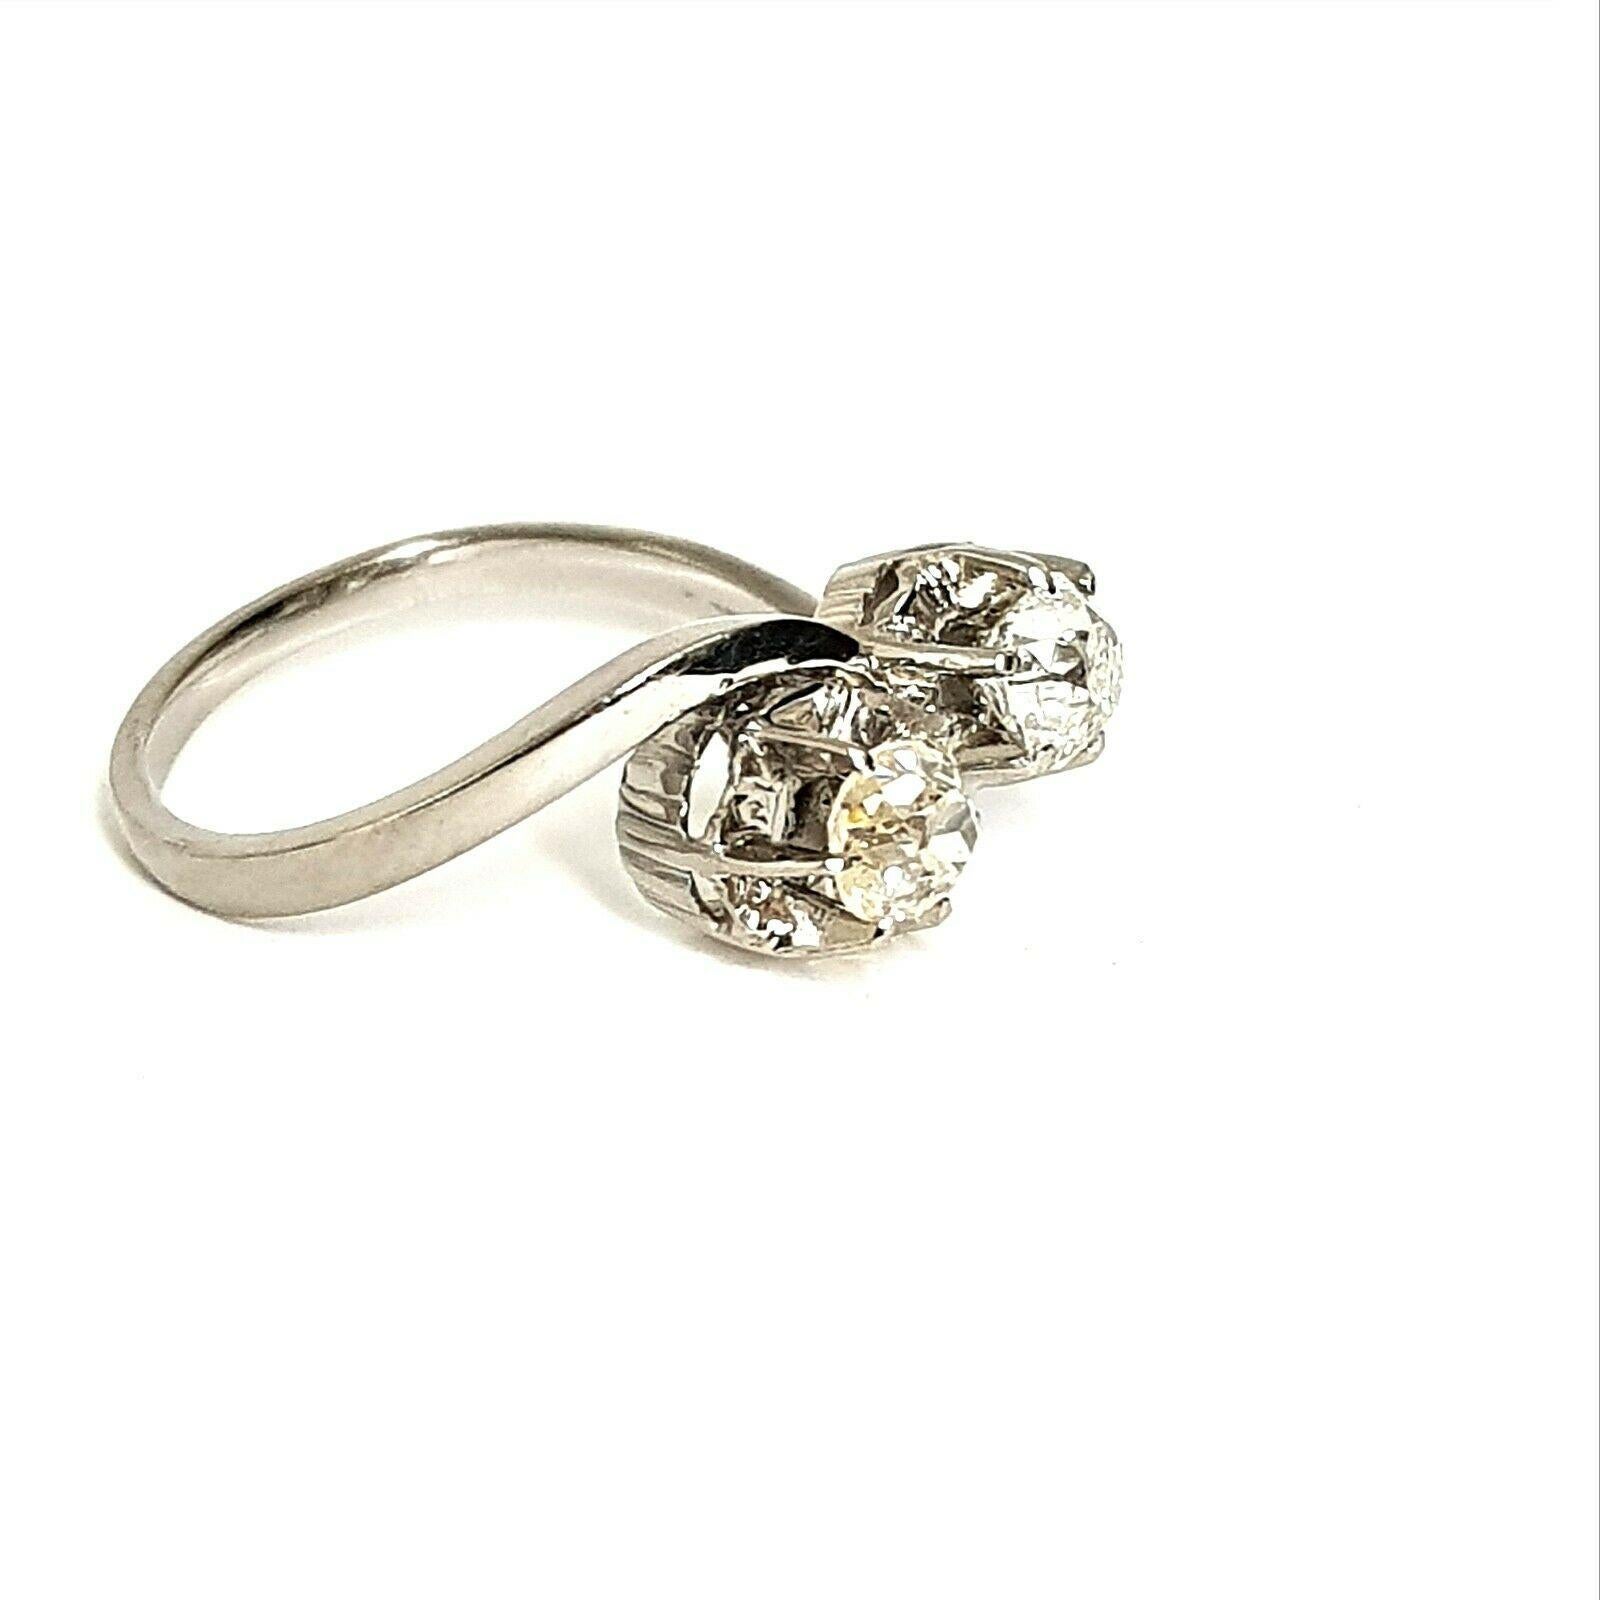  This is an antique 2 stone old cut diamond ring in approximately 0.30 carat total weight, I color and SI2 stone clarity. 
Specifications:
    main stone: OLD CUT ROUND DIAMOND
    diamonds: NONE
    carat total weight: APPROXIMATELY 0.30CTW
   